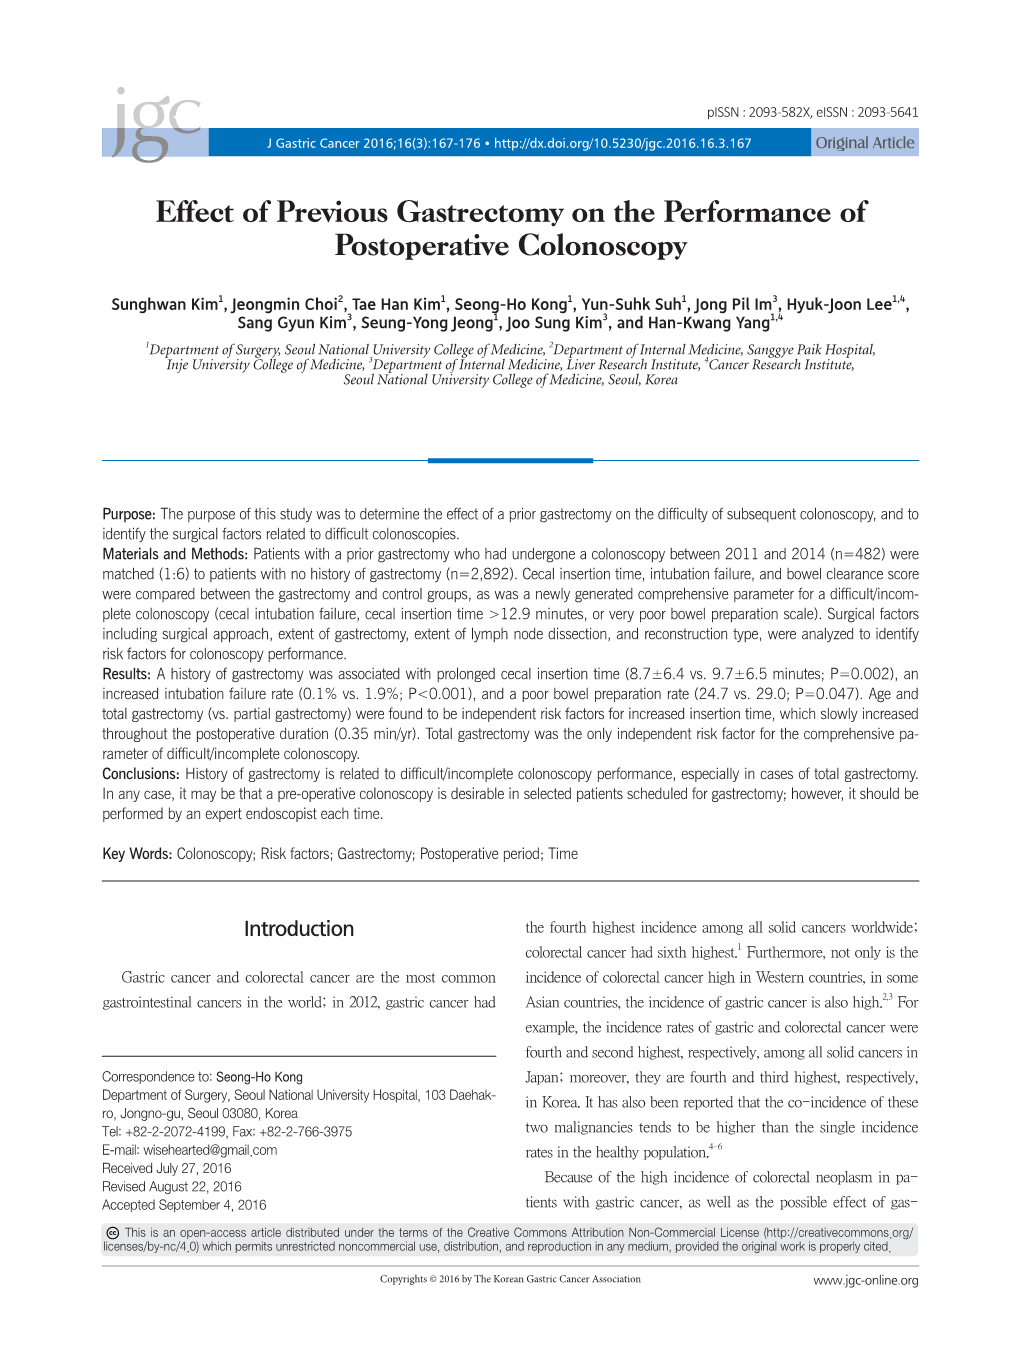 Effect of Previous Gastrectomy on the Performance of Postoperative Colonoscopy